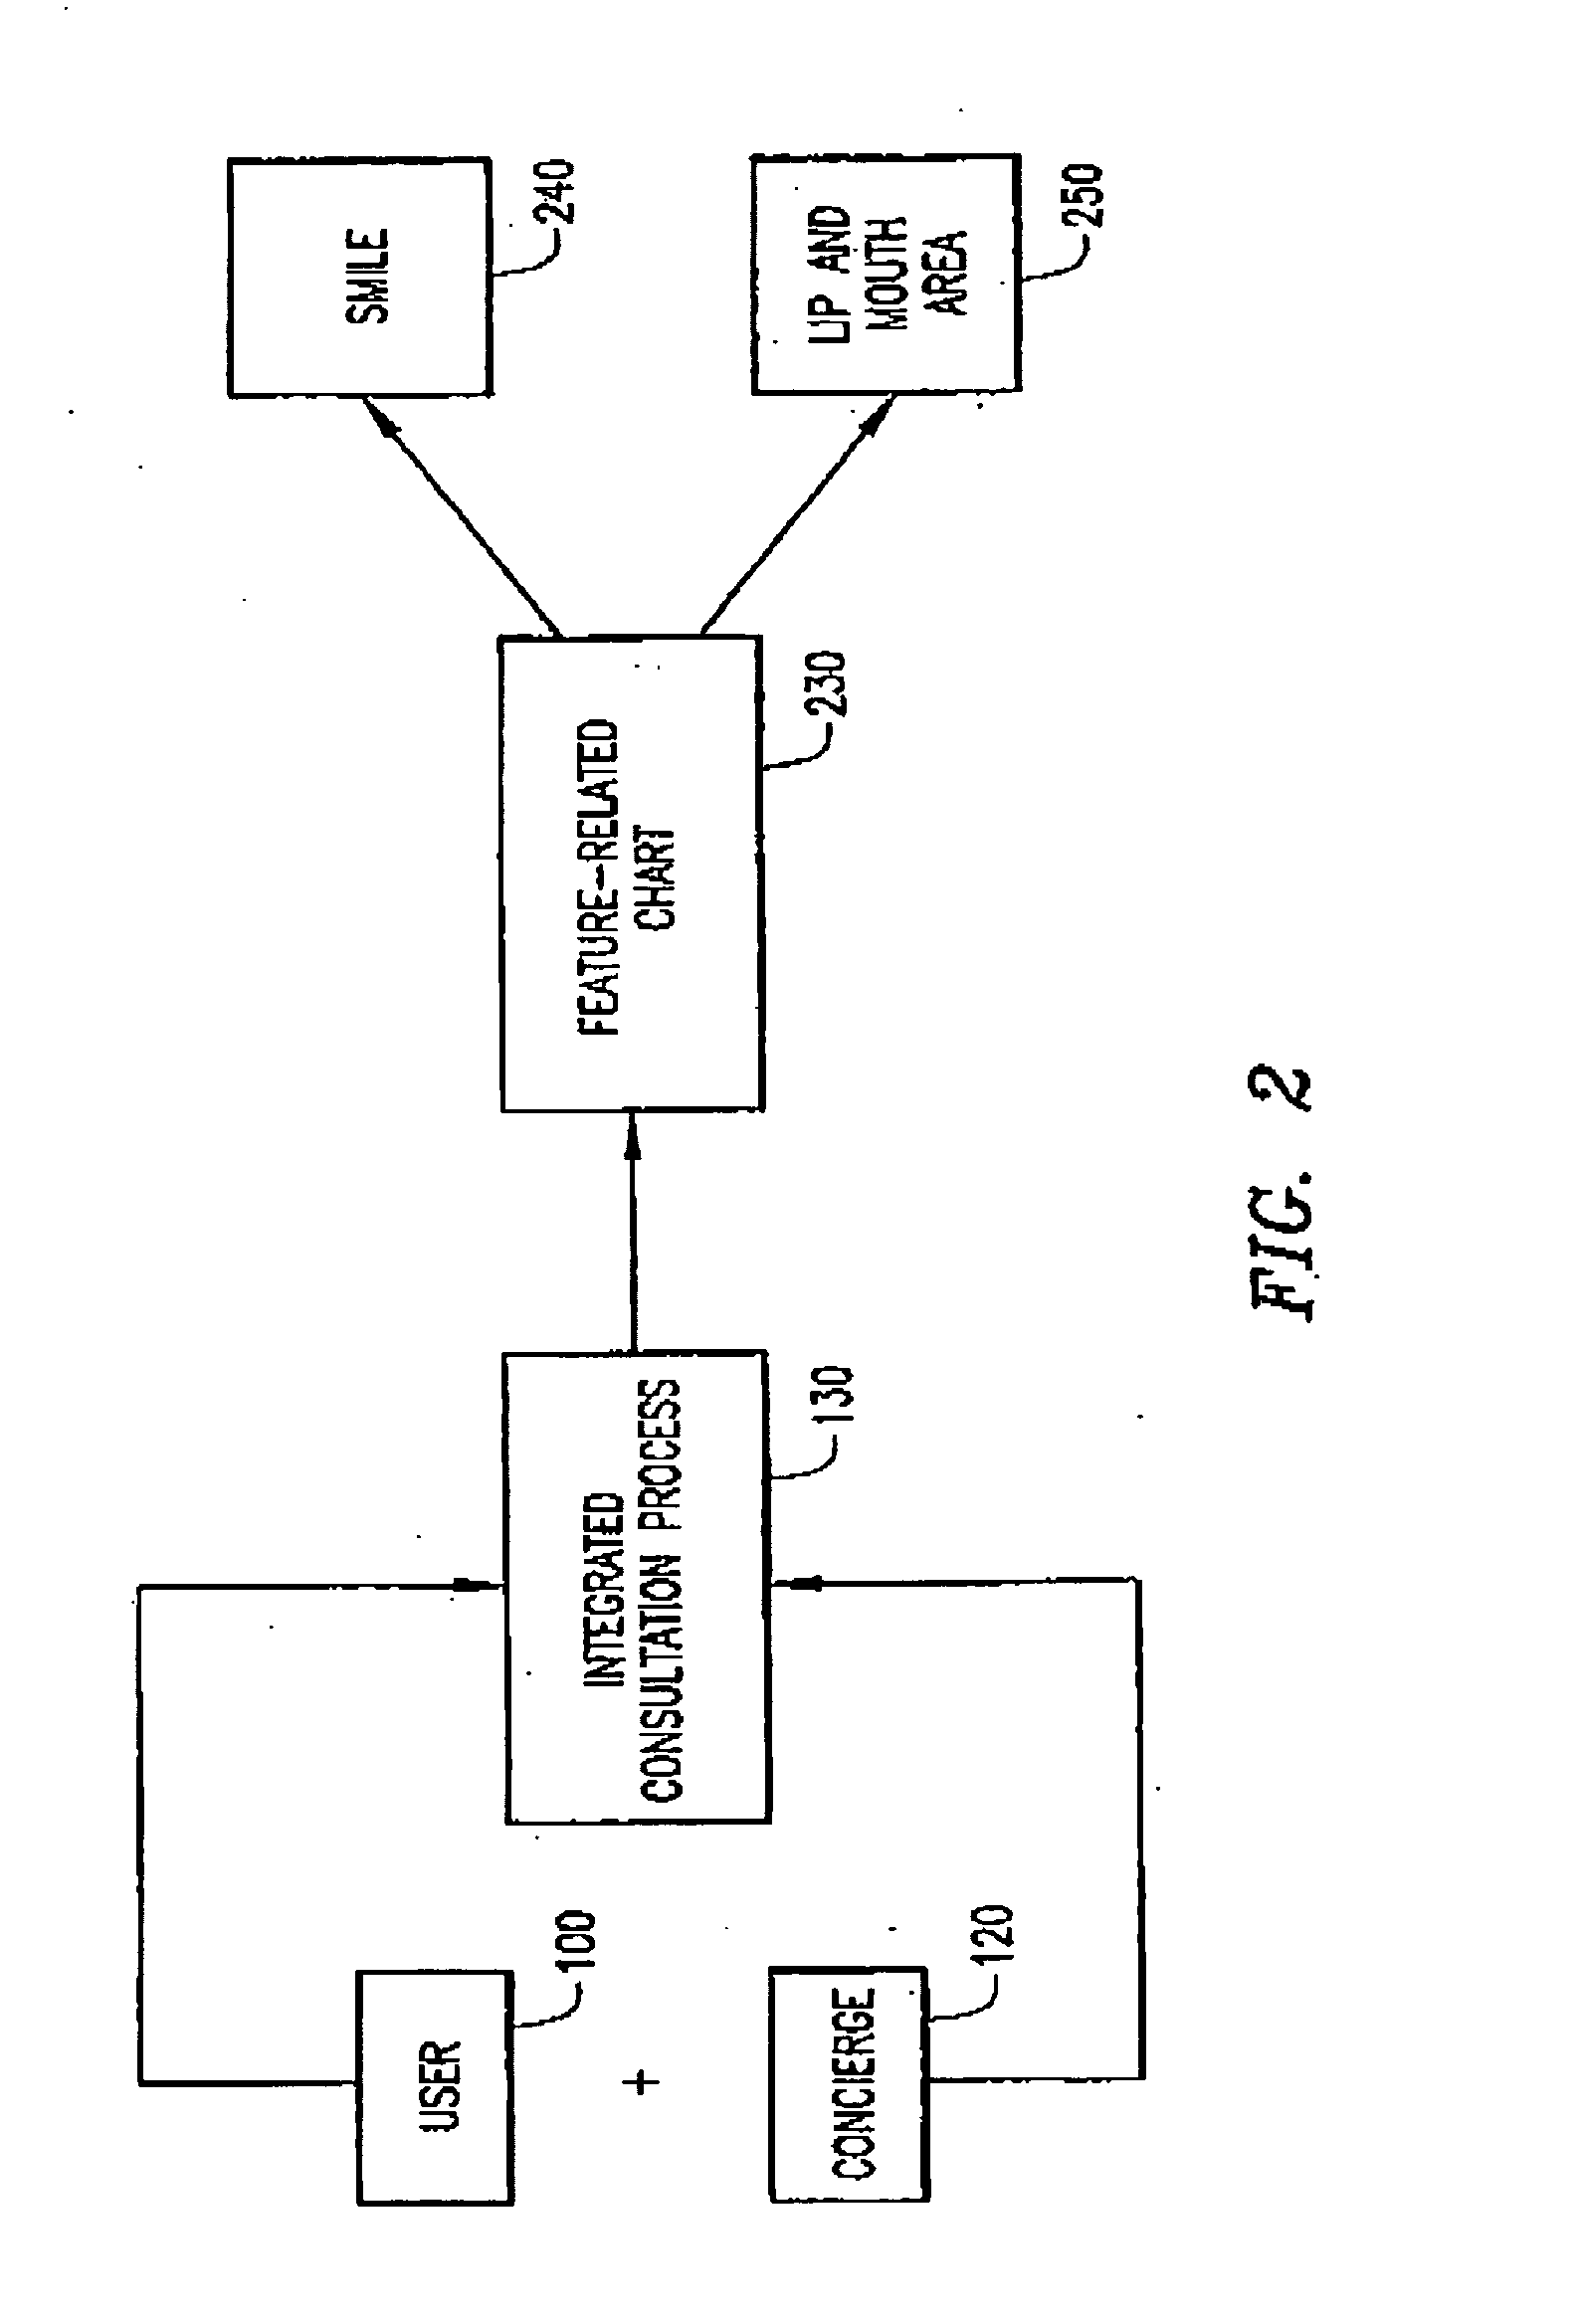 Systems and methods using a dynamic database to provide aesthetic improvement procedures